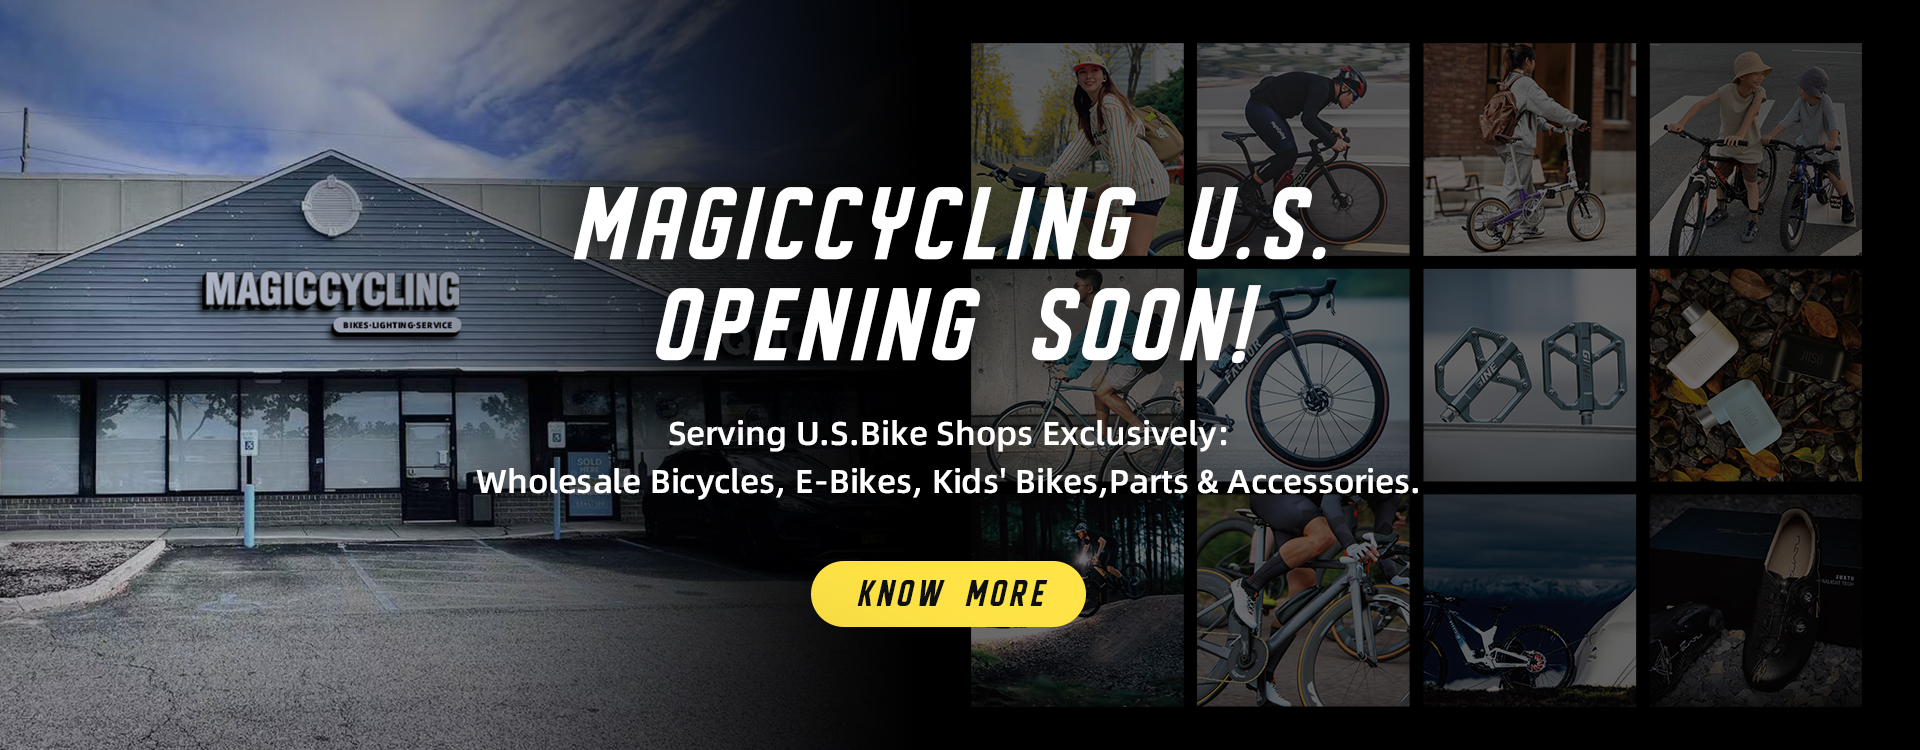 Magiccycling U.S. Opening soon!